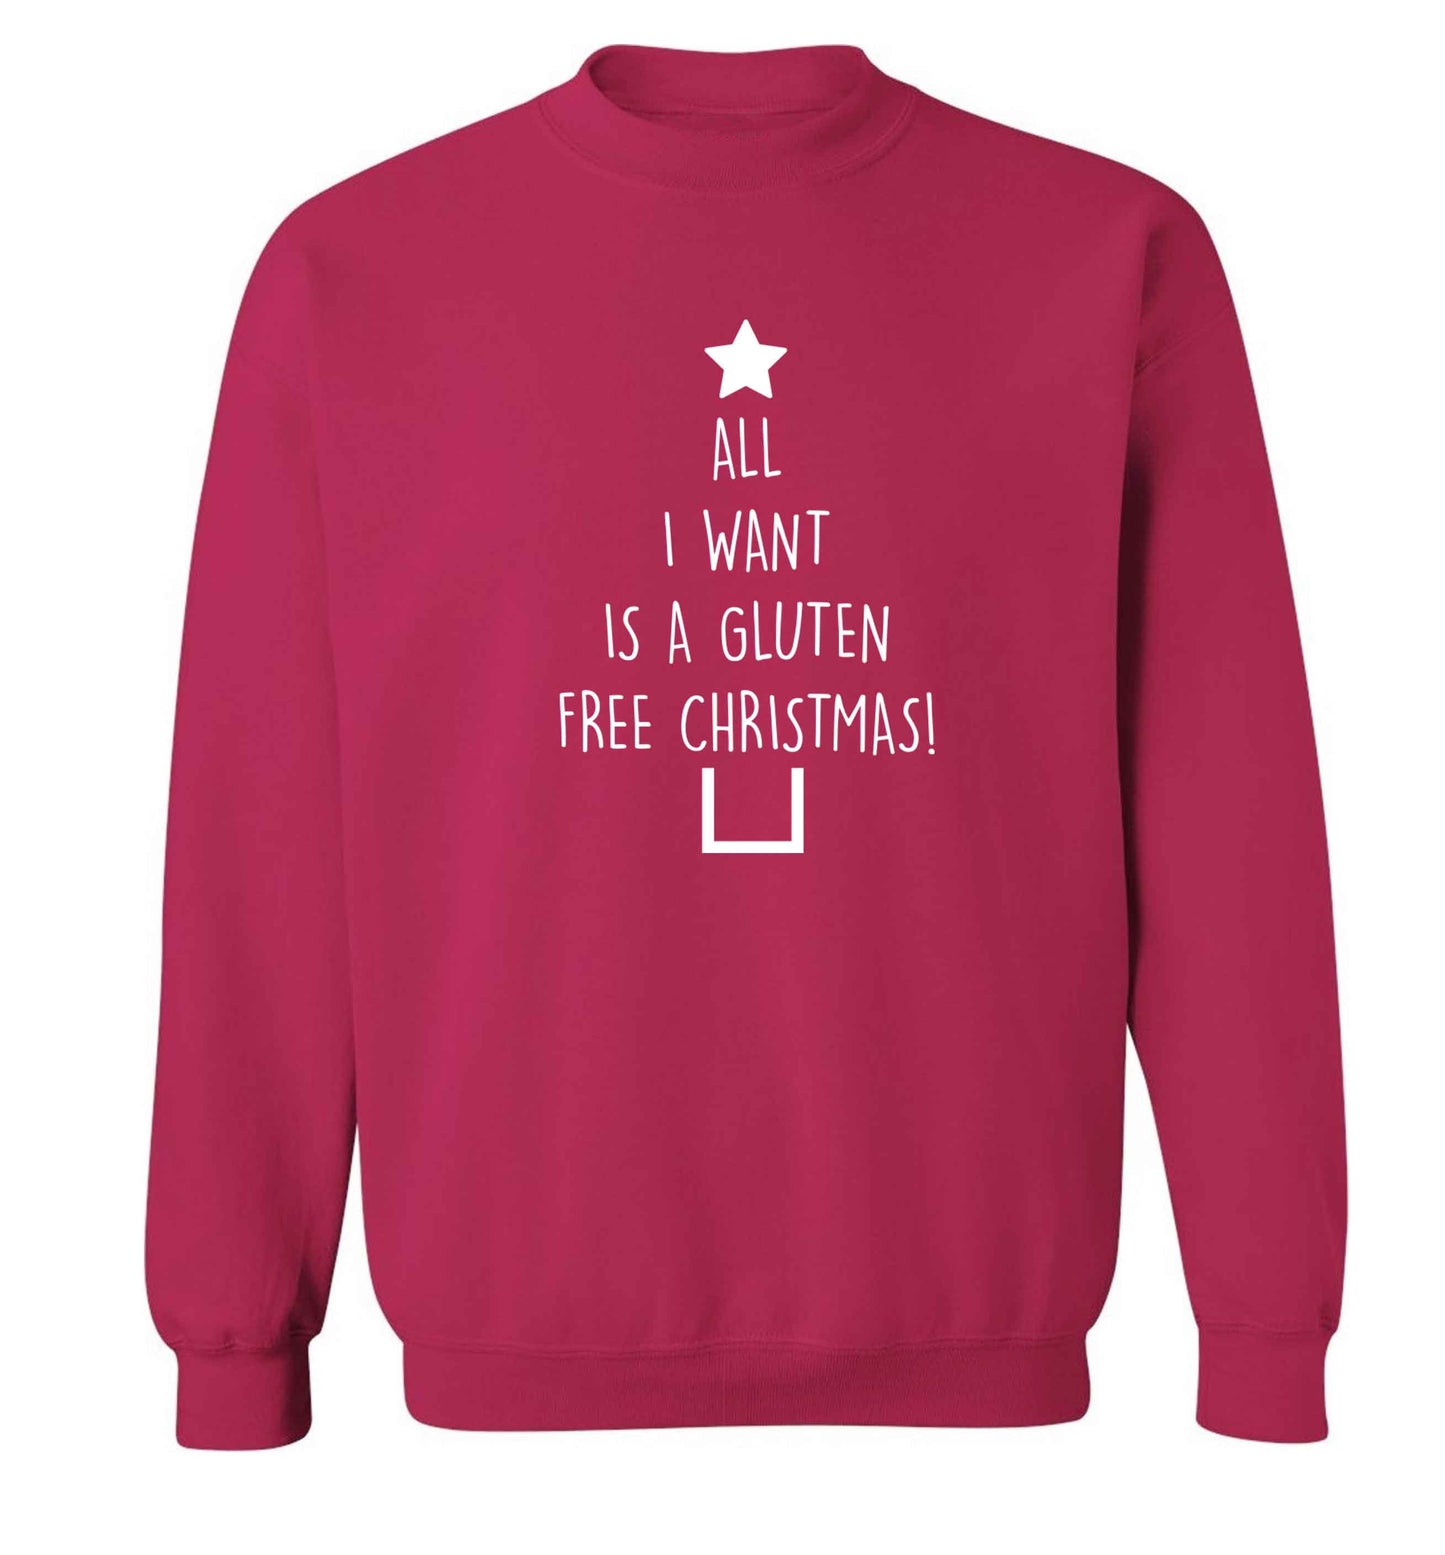 All I want is a gluten free Christmas Adult's unisex pink Sweater 2XL